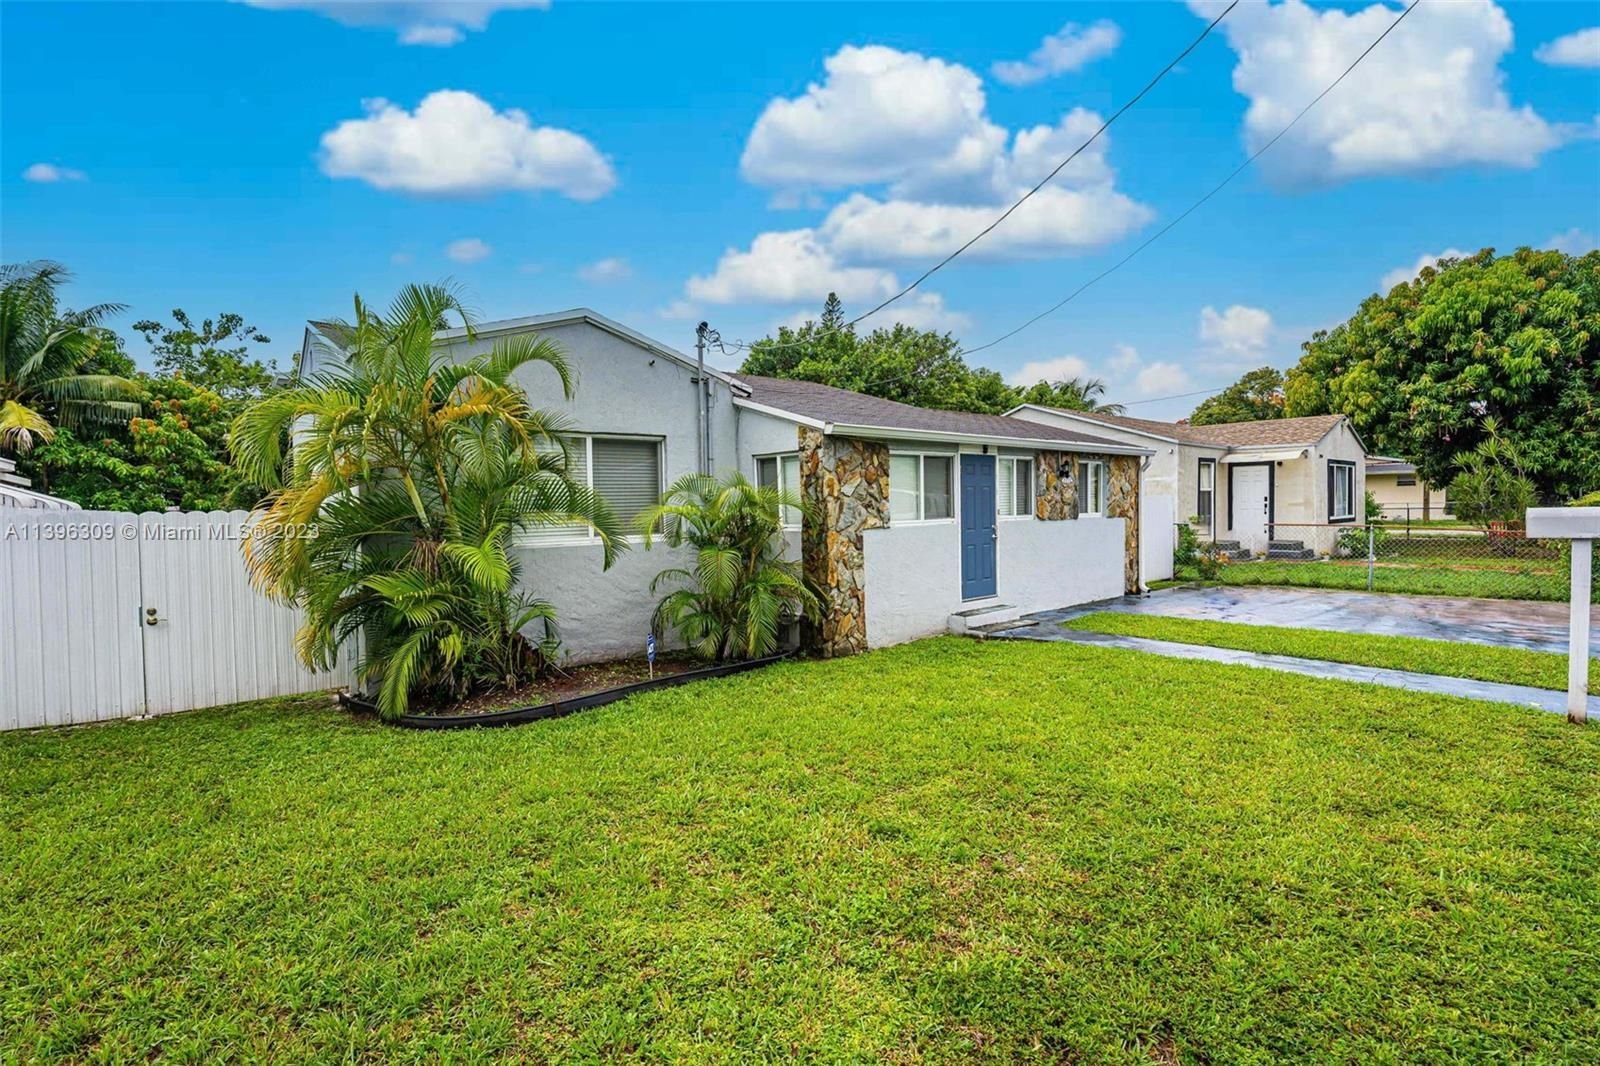 Real estate property located at 1376 41st St, Miami-Dade County, Miami, FL